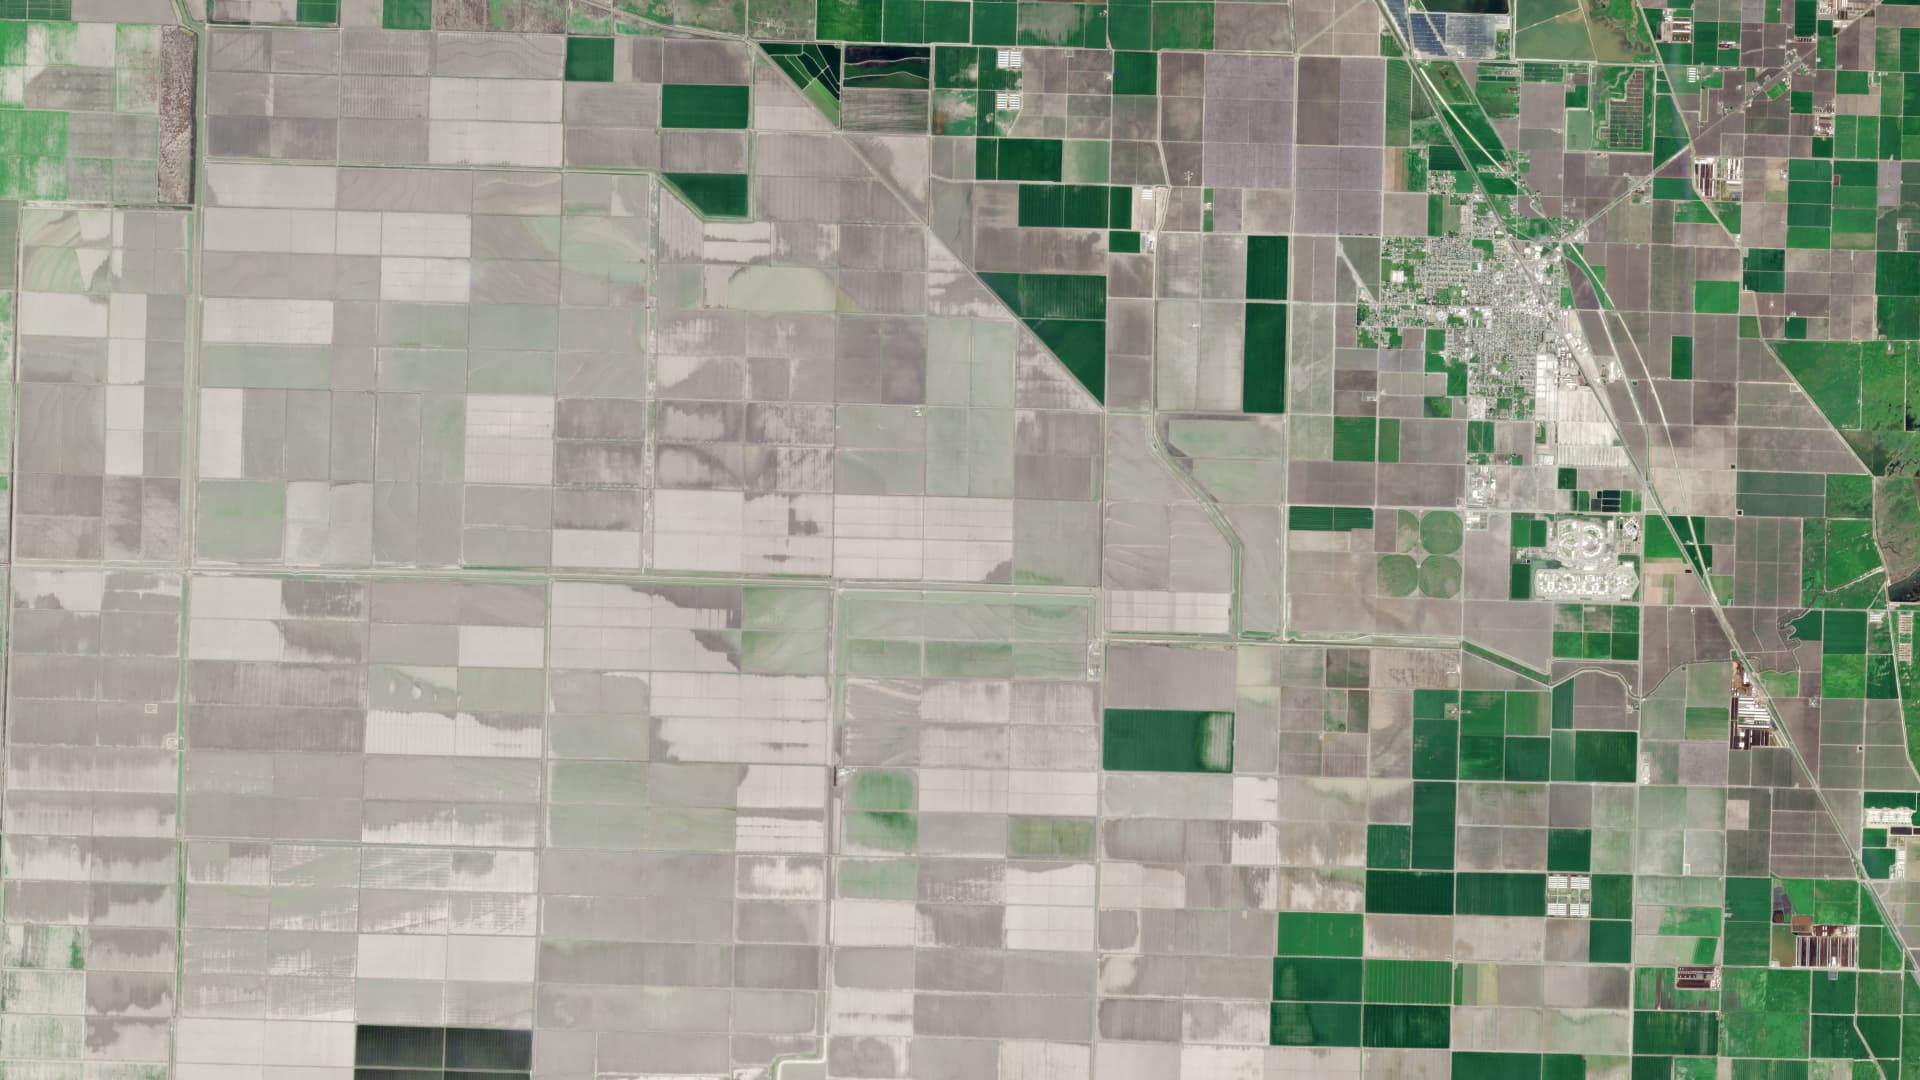 Satellite imagery shows a large swath of farmland before water filled the Tulare Basin.